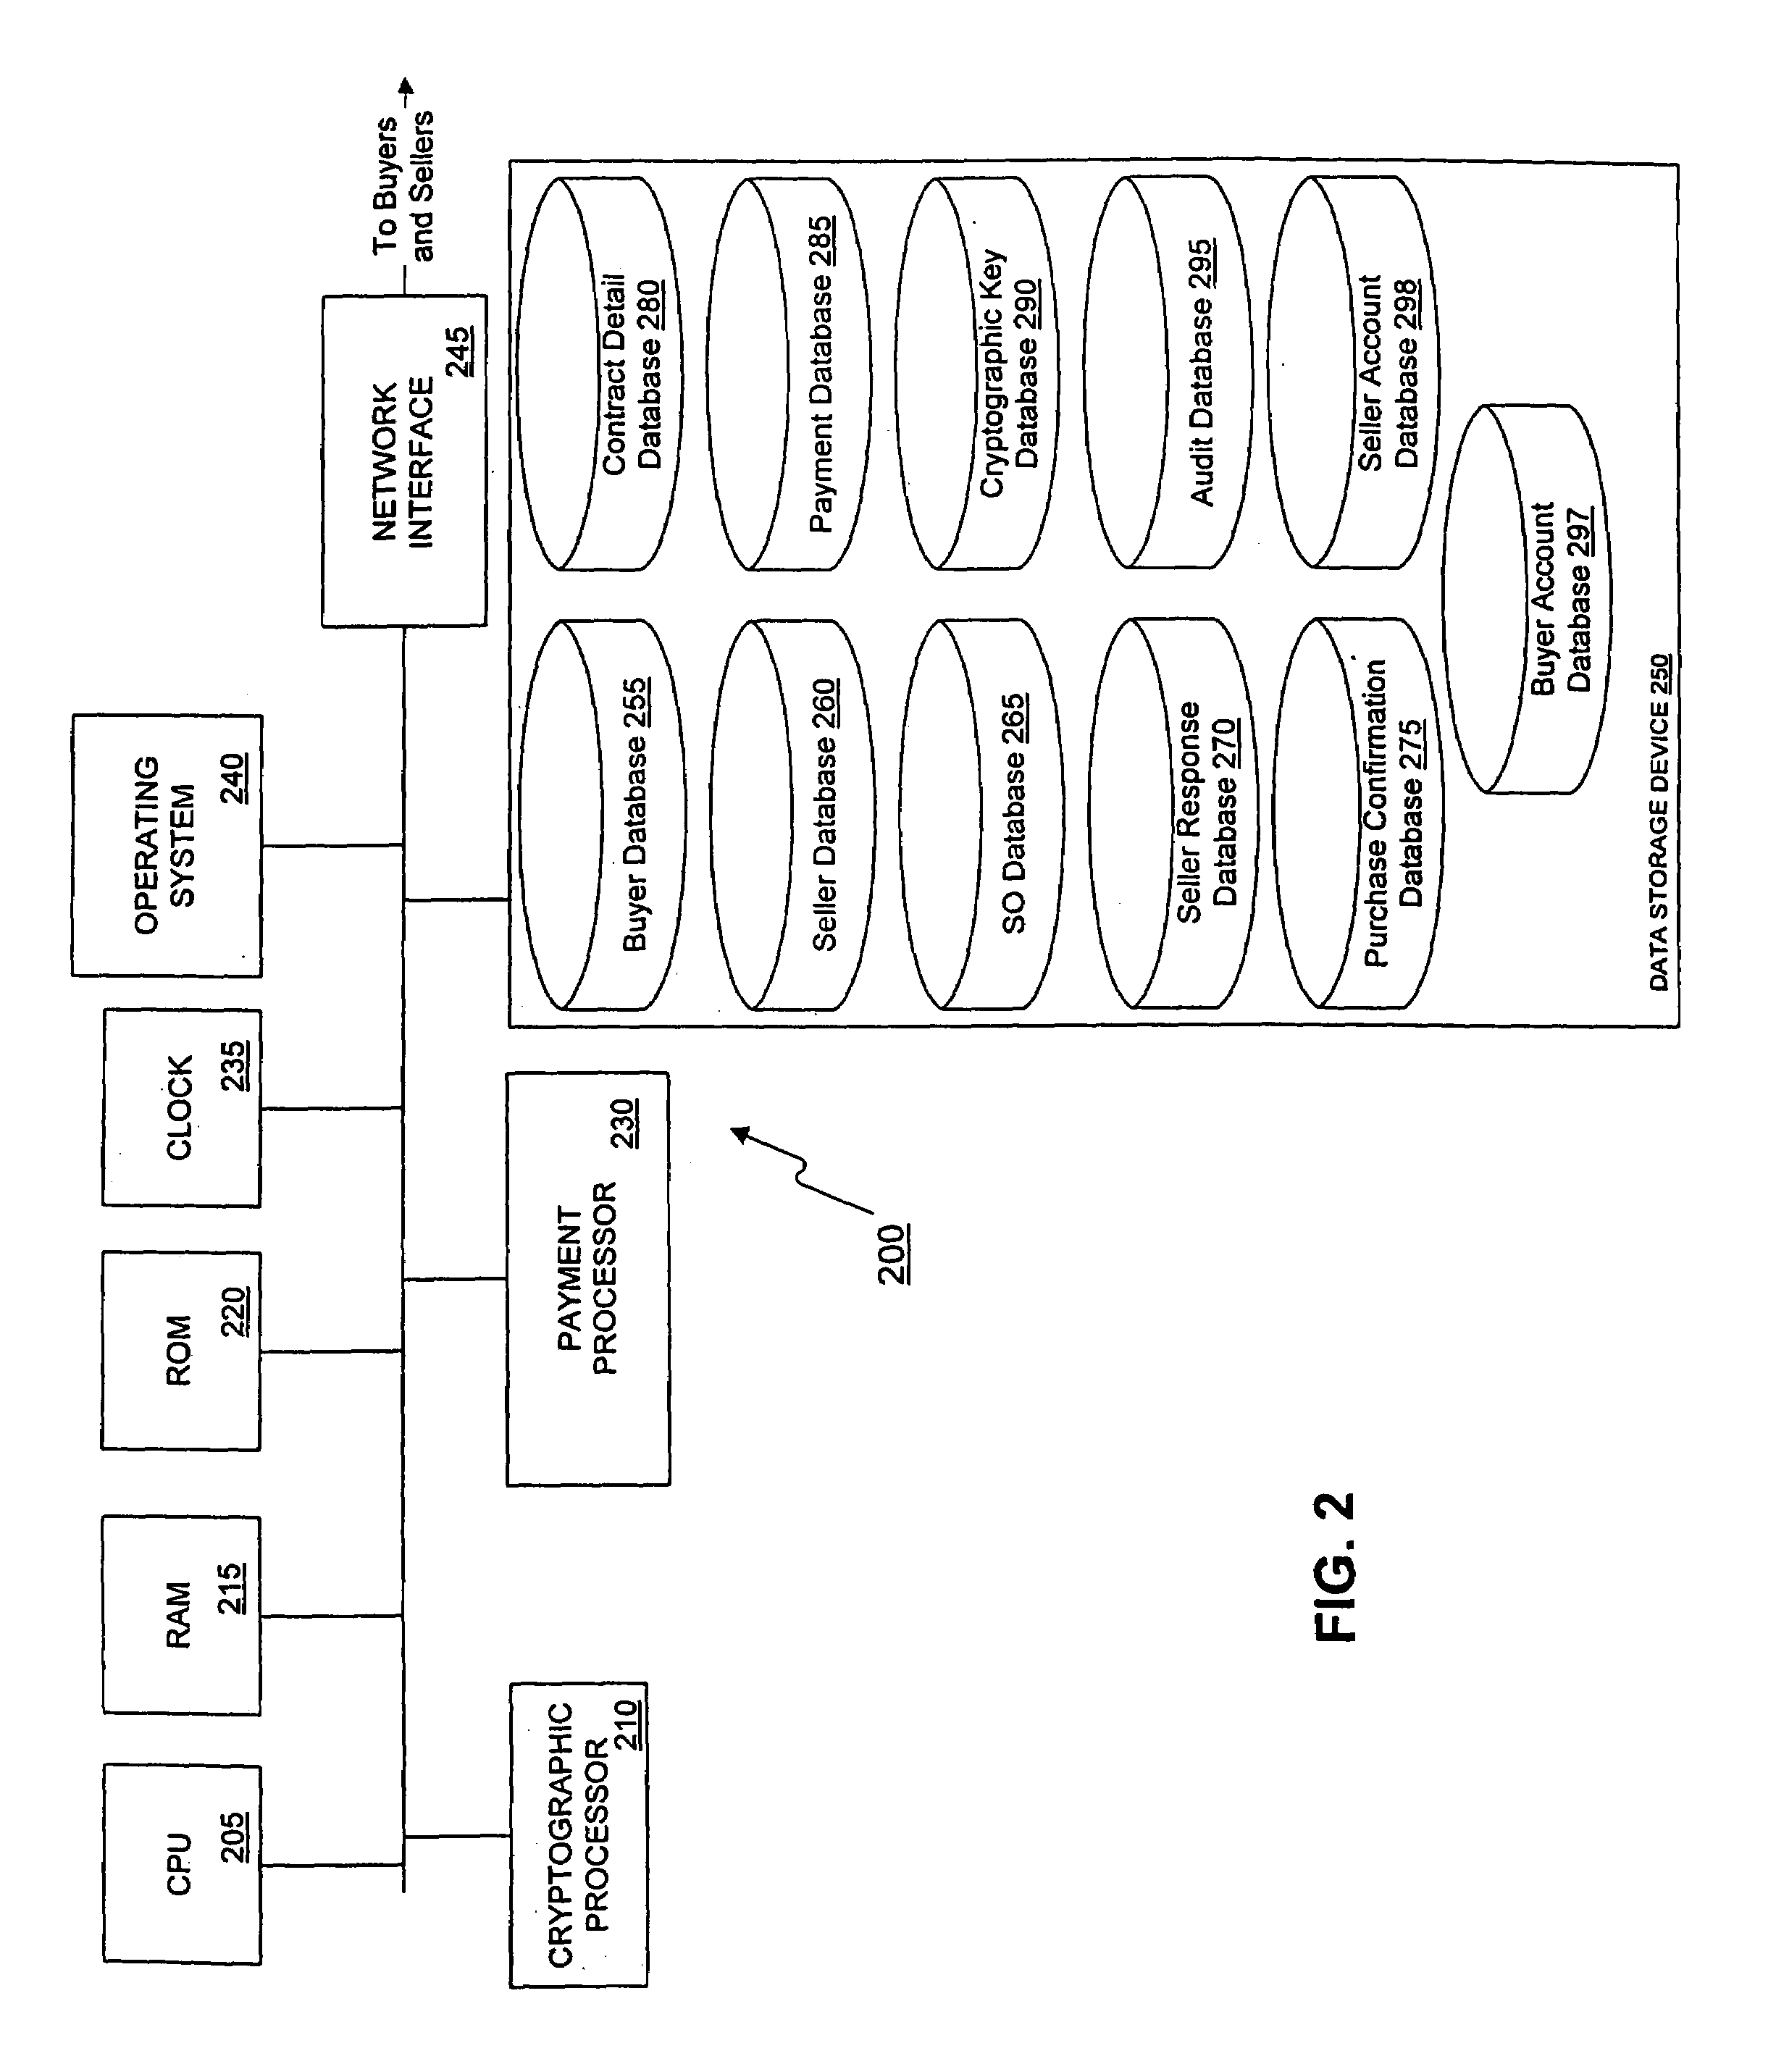 Method and apparatus for generating a sale offer over an electronic network system